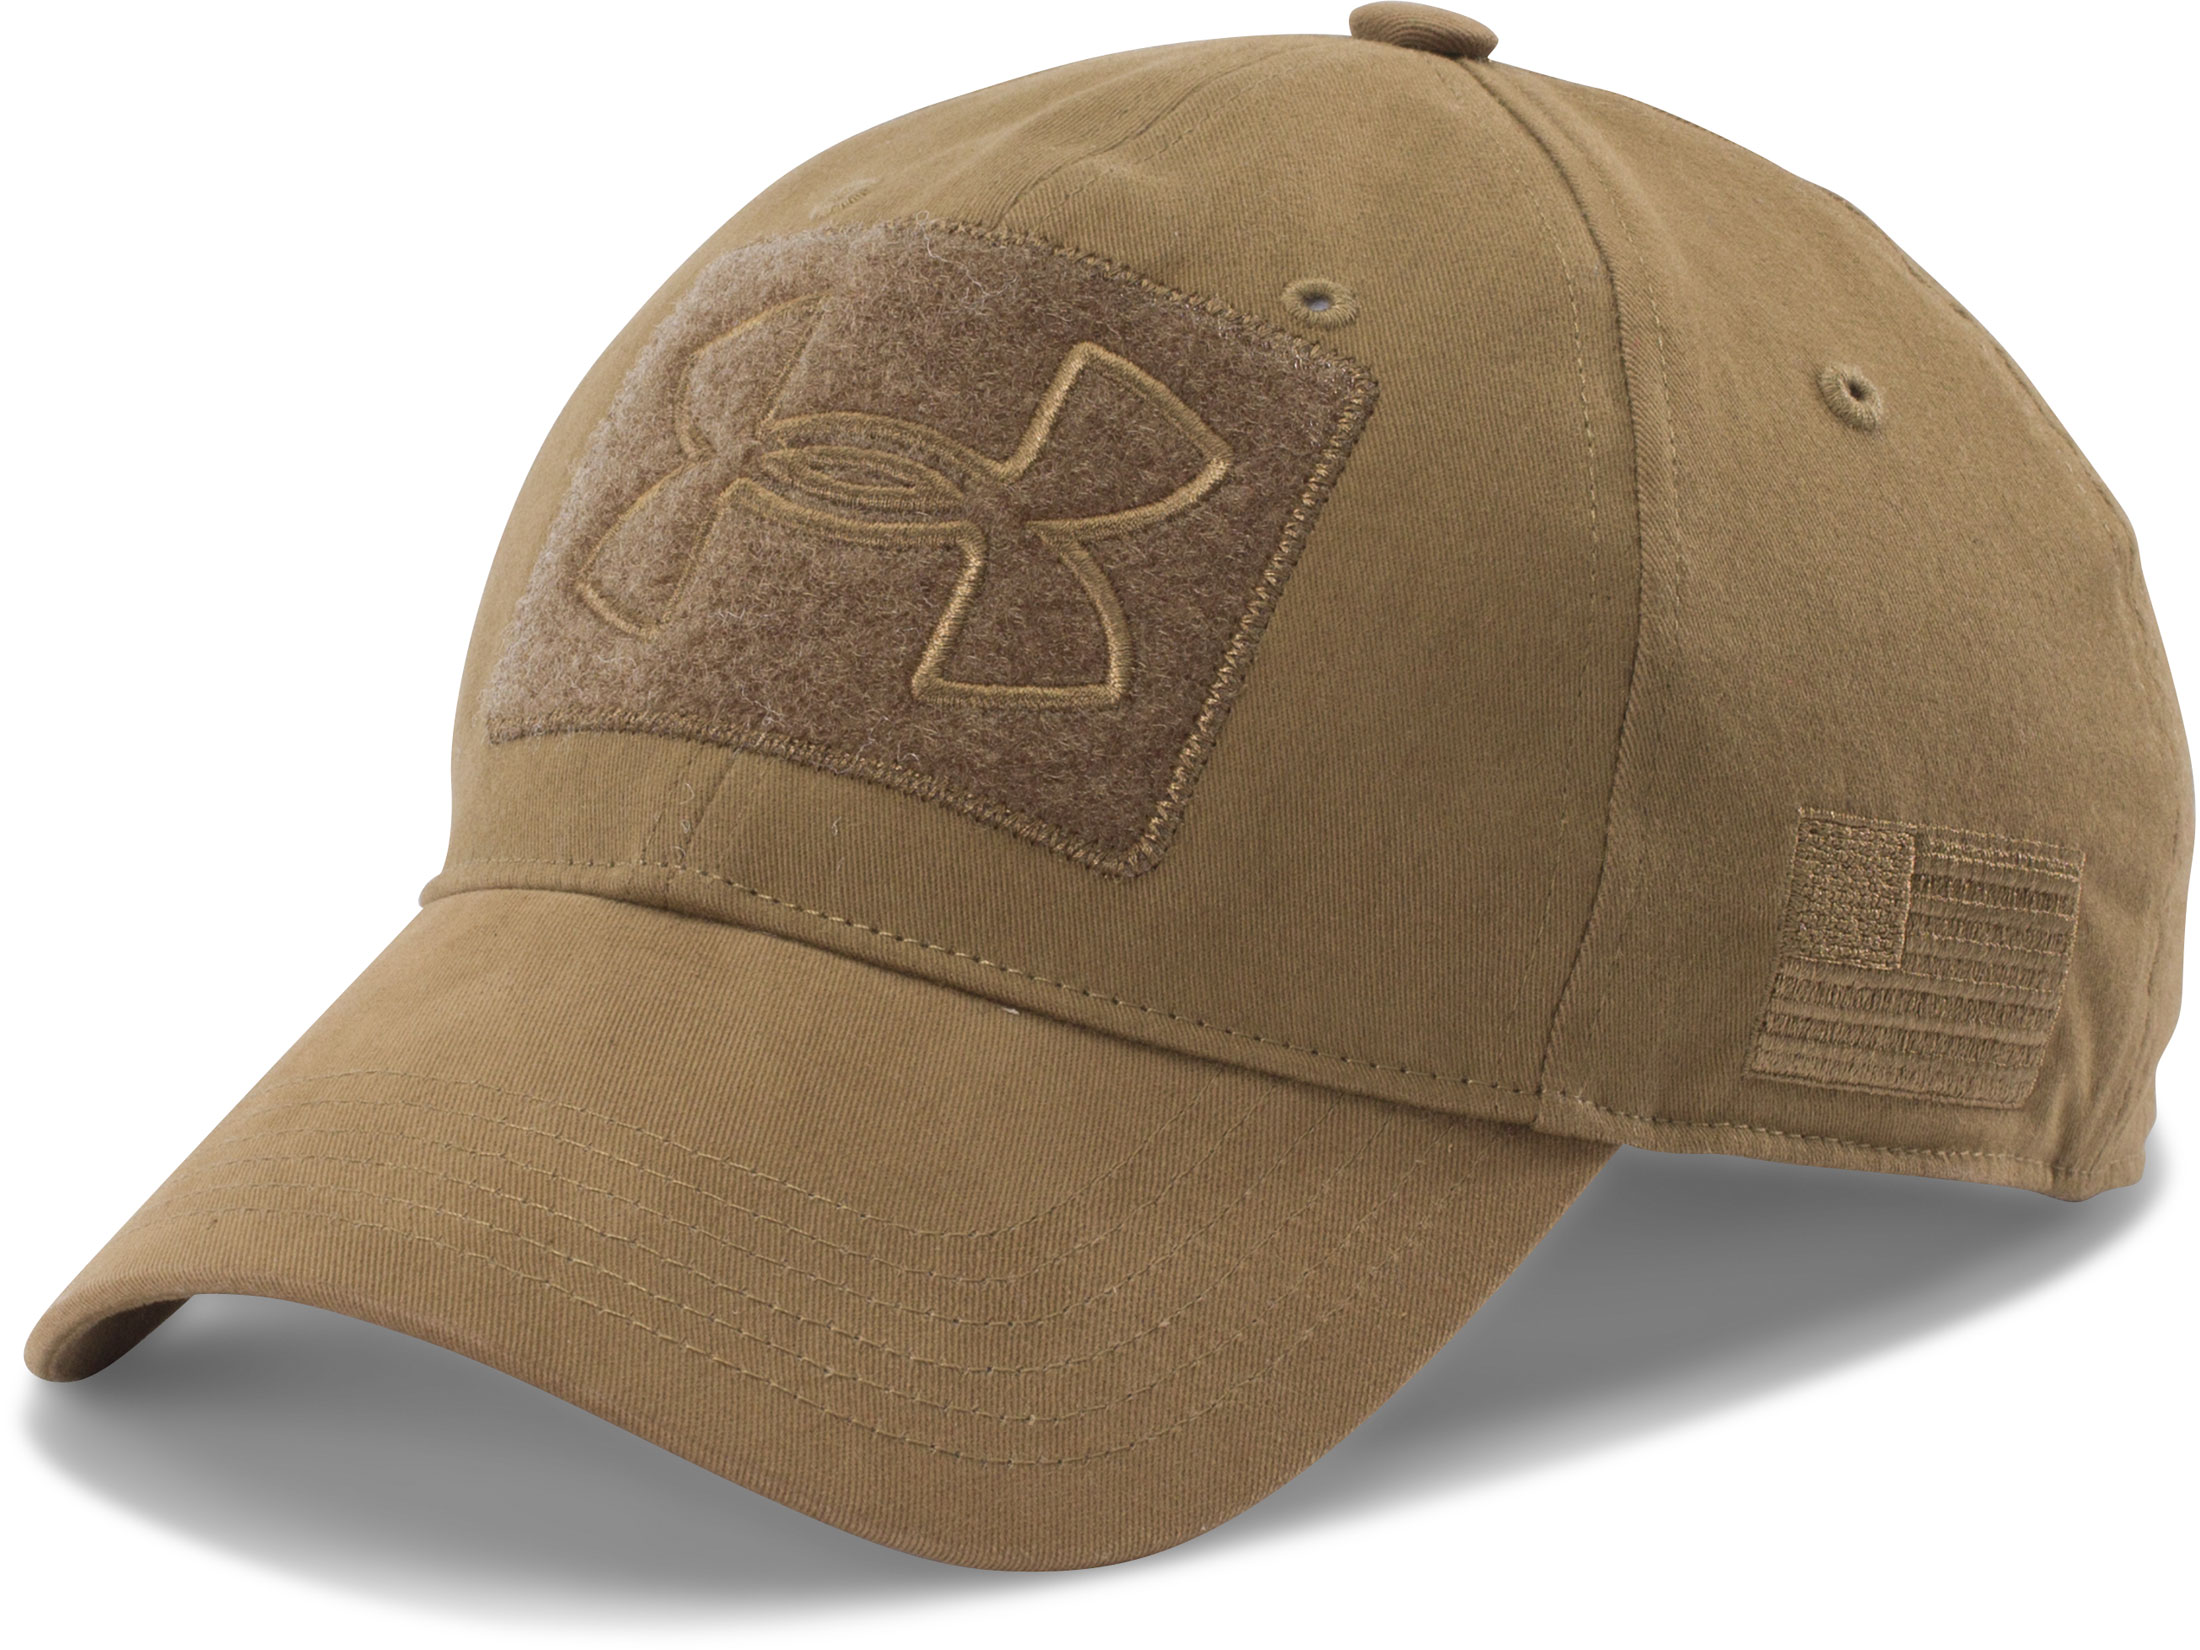 Tan fitted cap